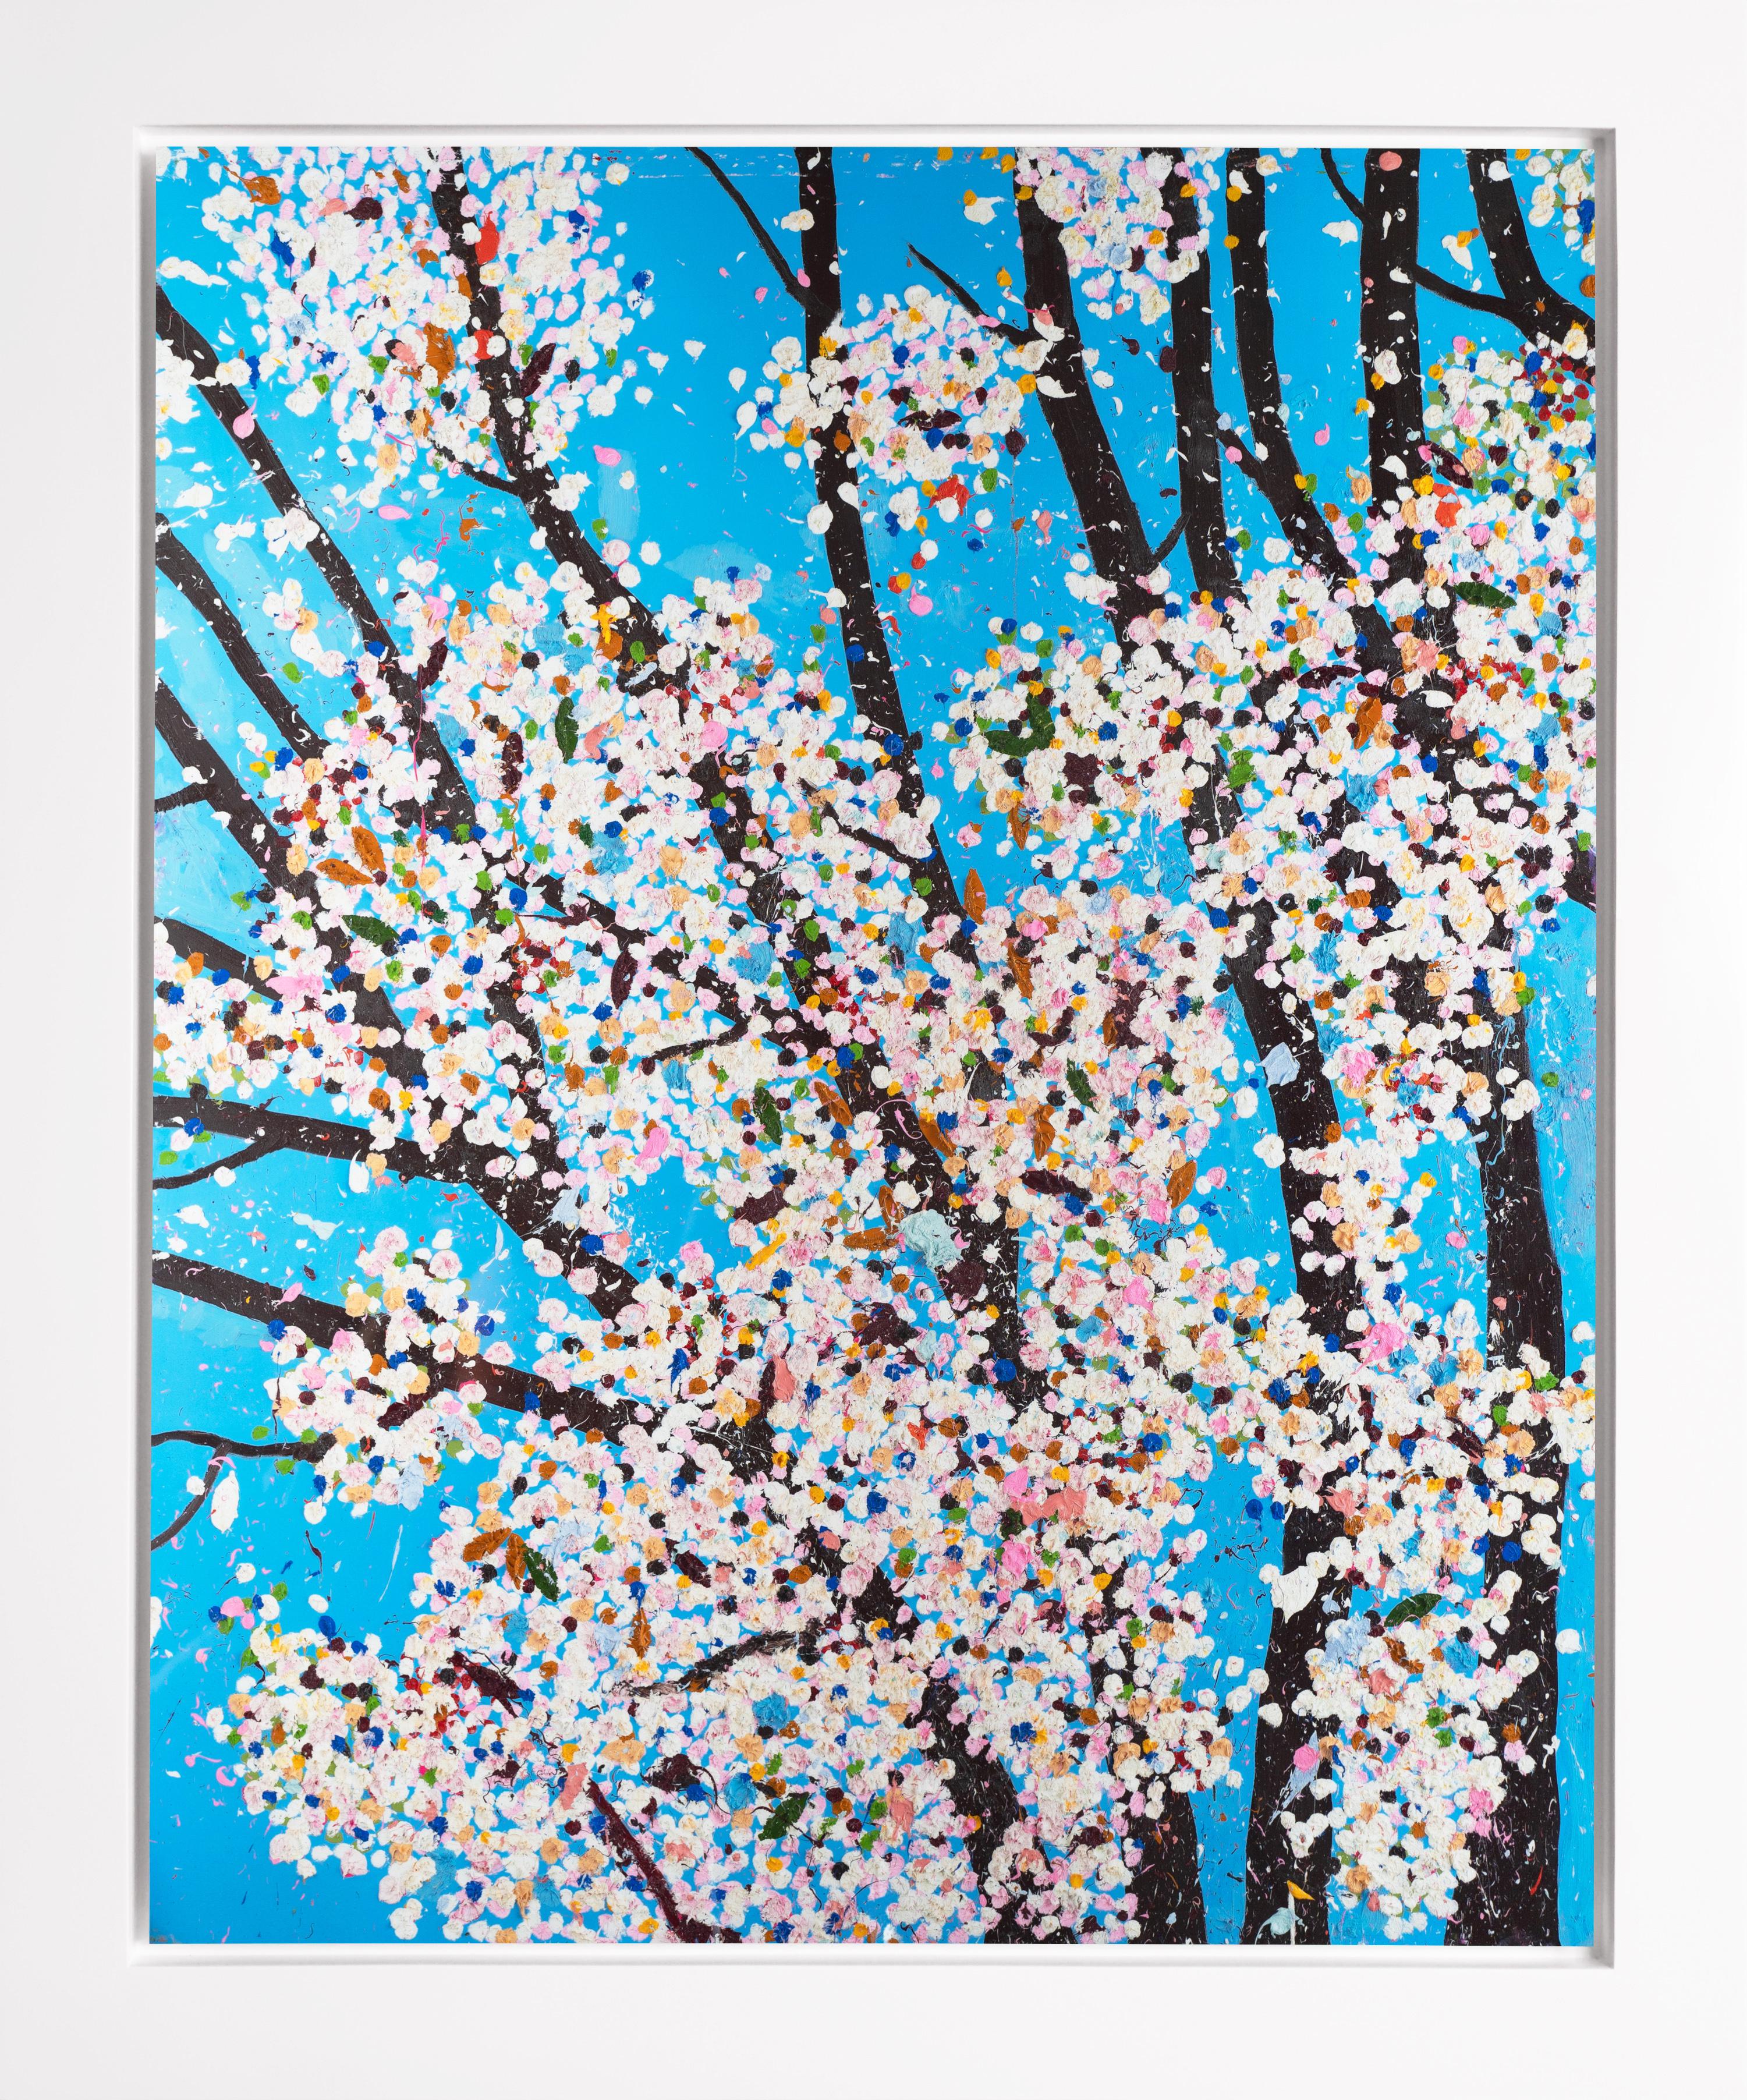 Damien Hirst Landscape Print - The Virtues 'Justice', Limited Edition 'Cherry Blossom' Landscape, 2021